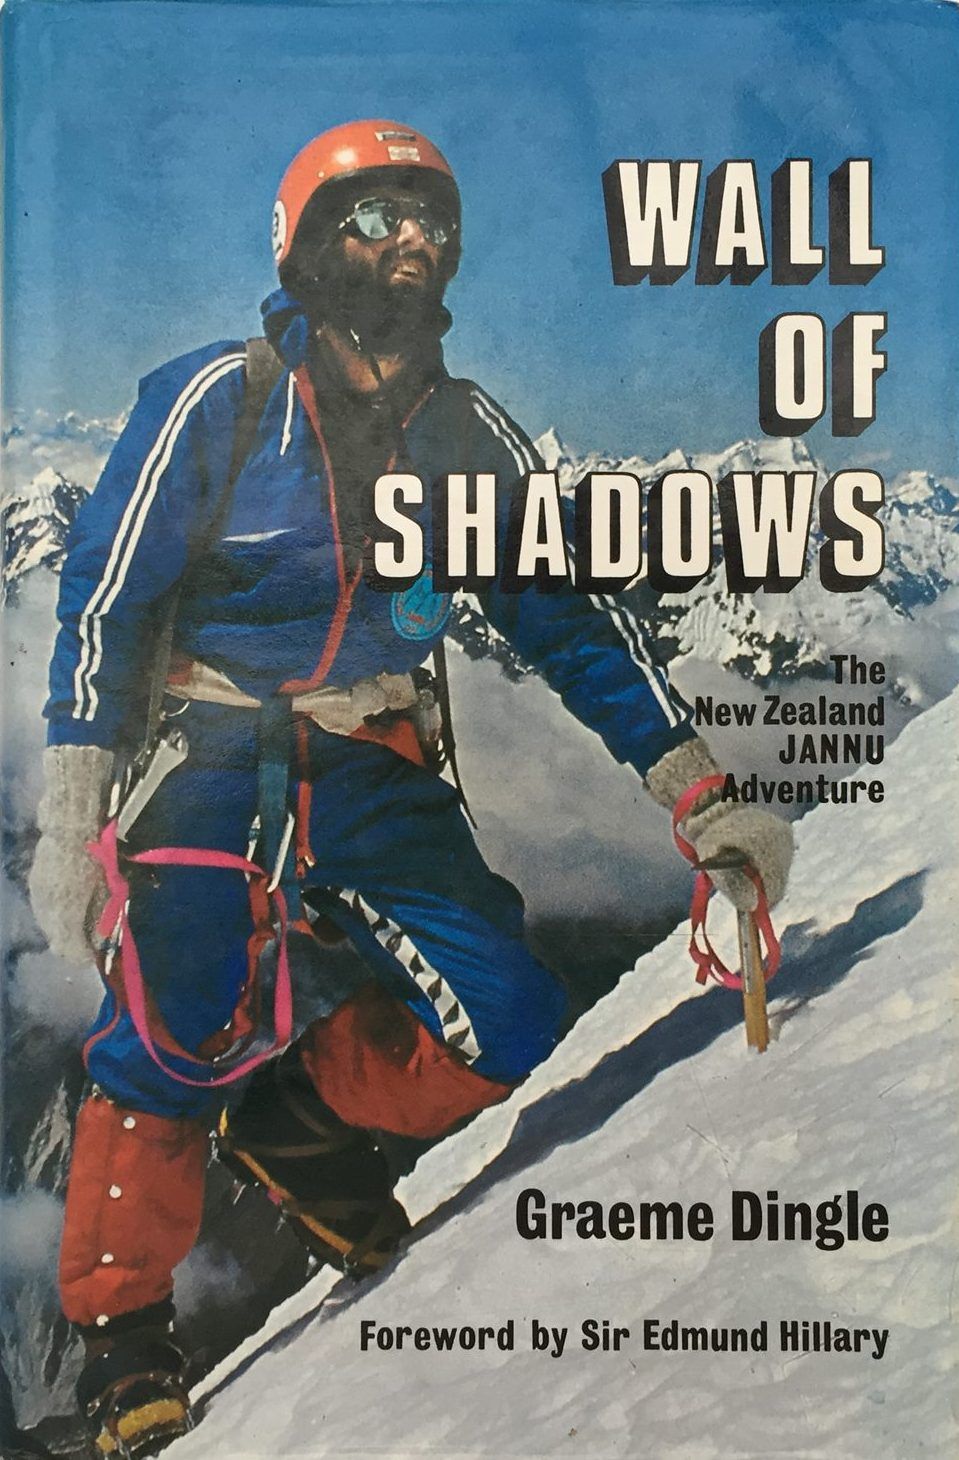 WALL OF SHADOWS: The New Zealand Jannu Adventure